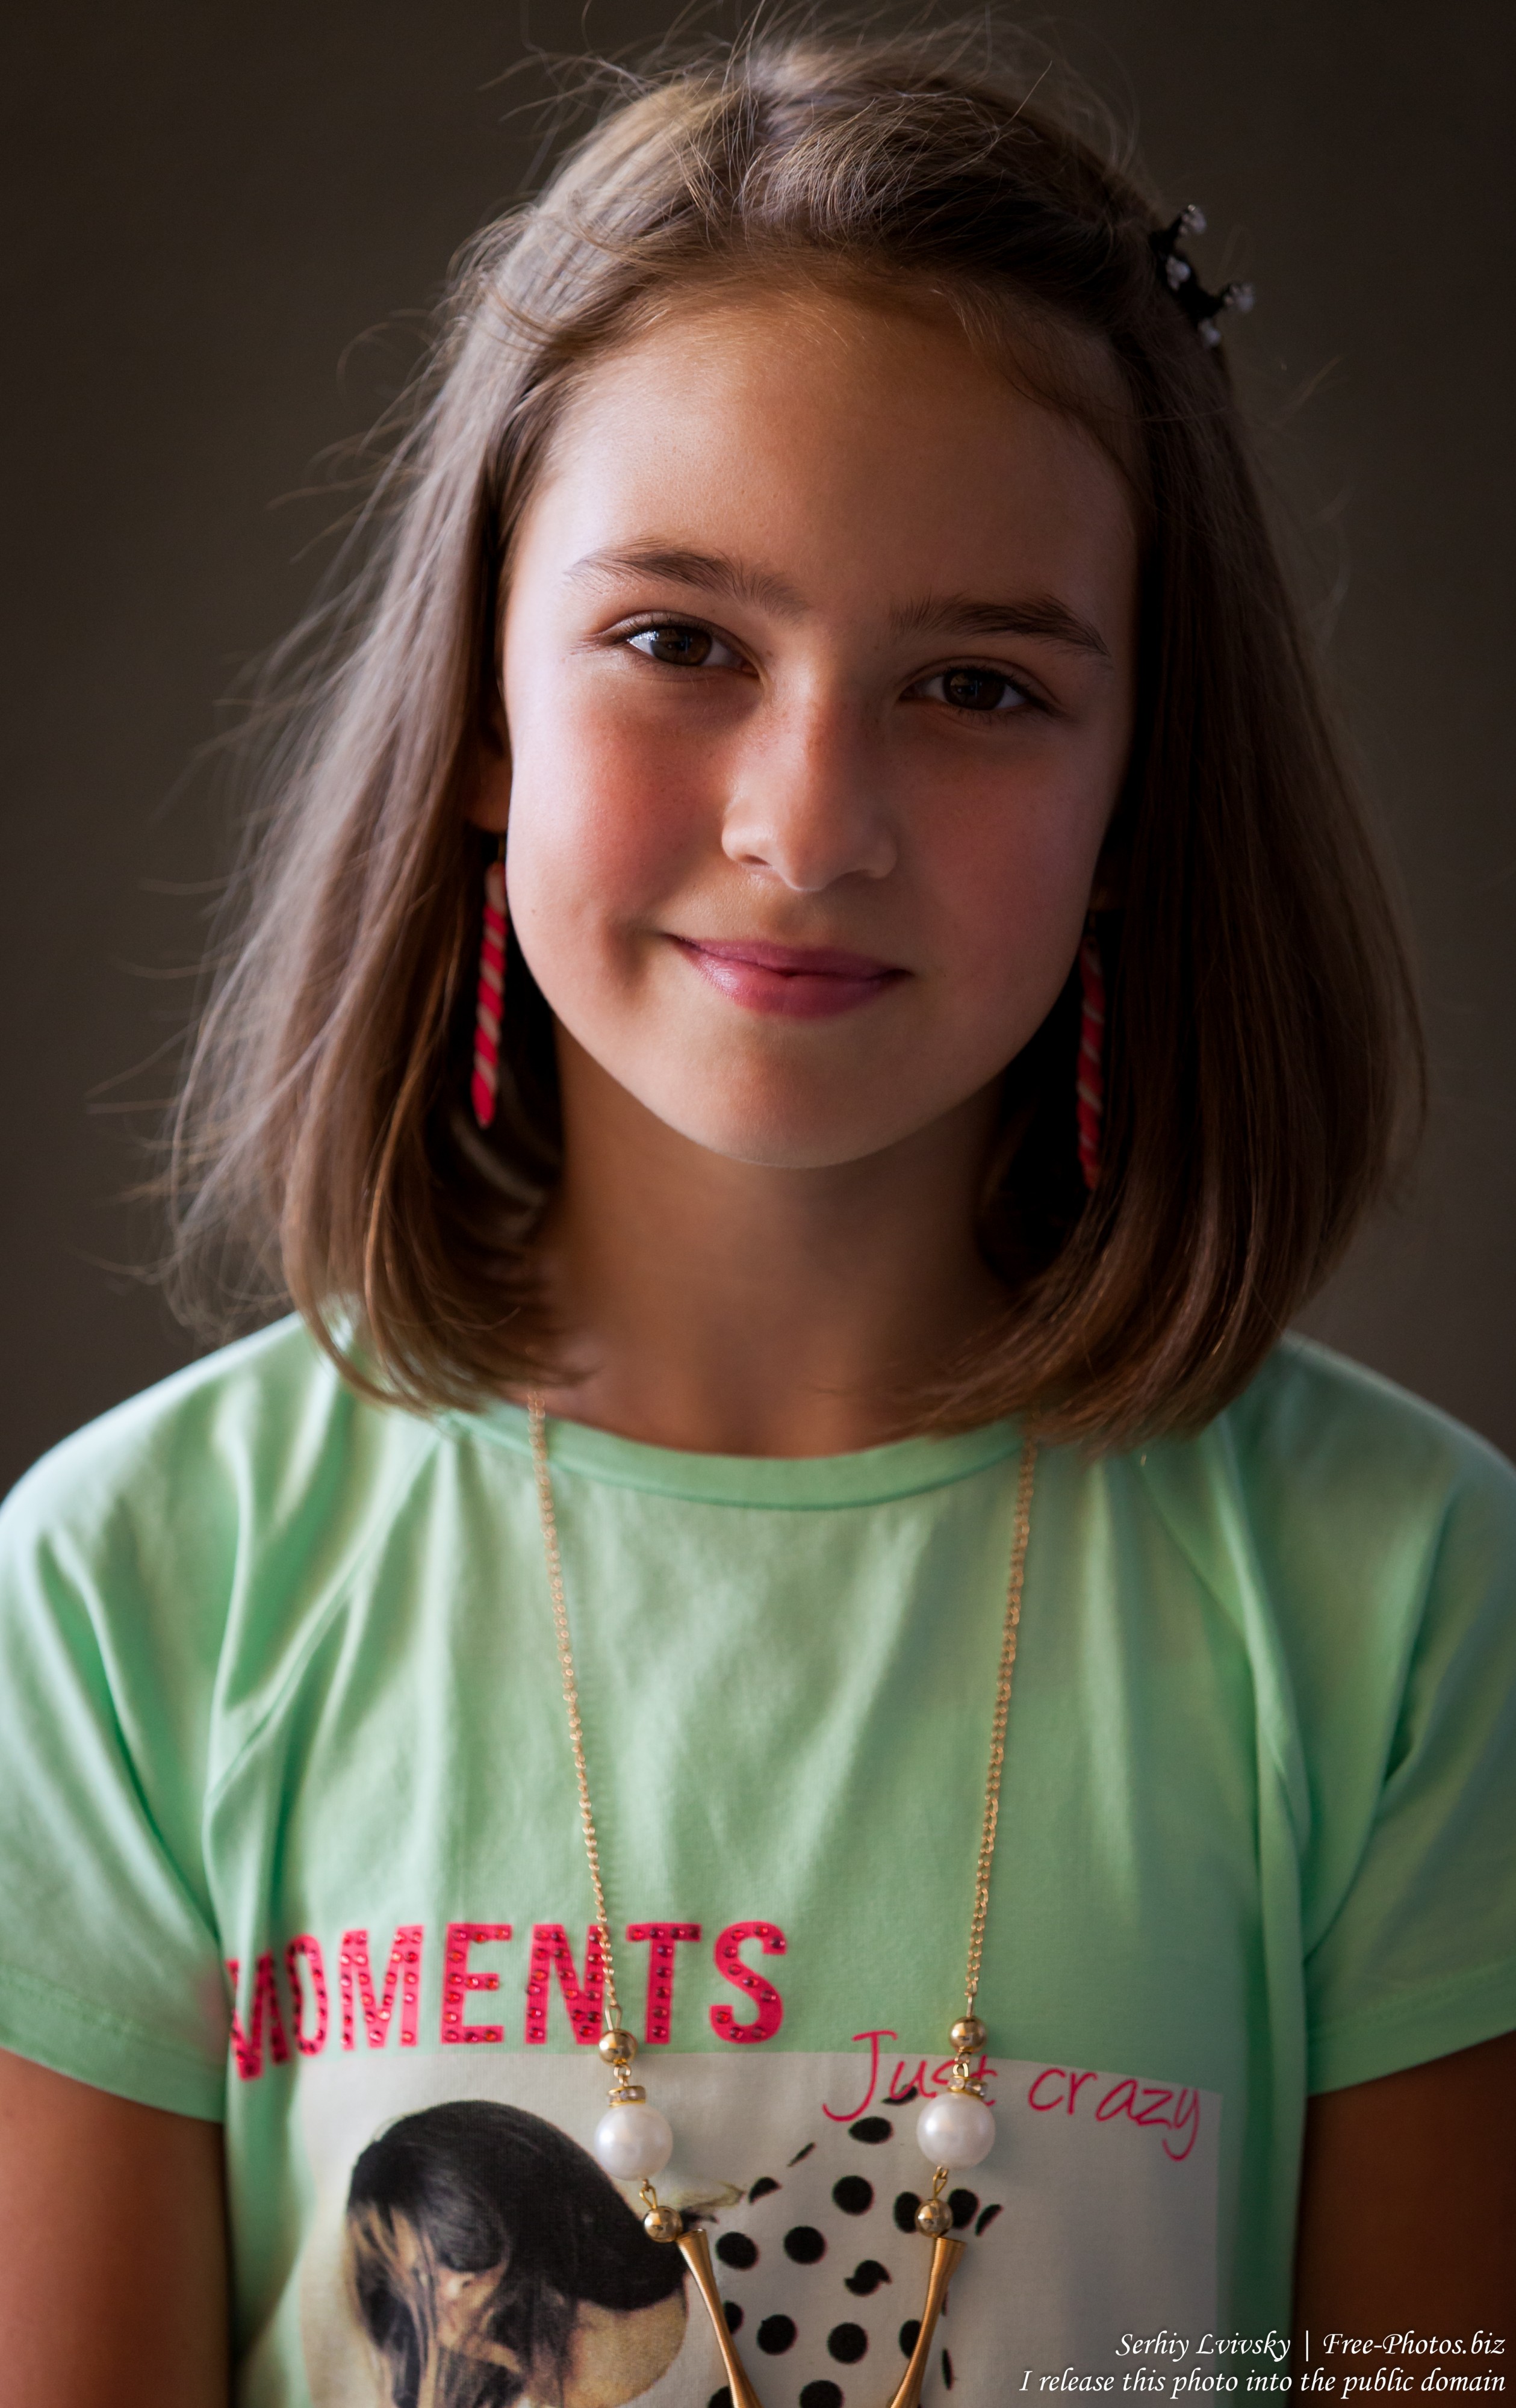 a 12-year-old girl photographed in July 2015 by Serhiy Lvivsky, picture 1